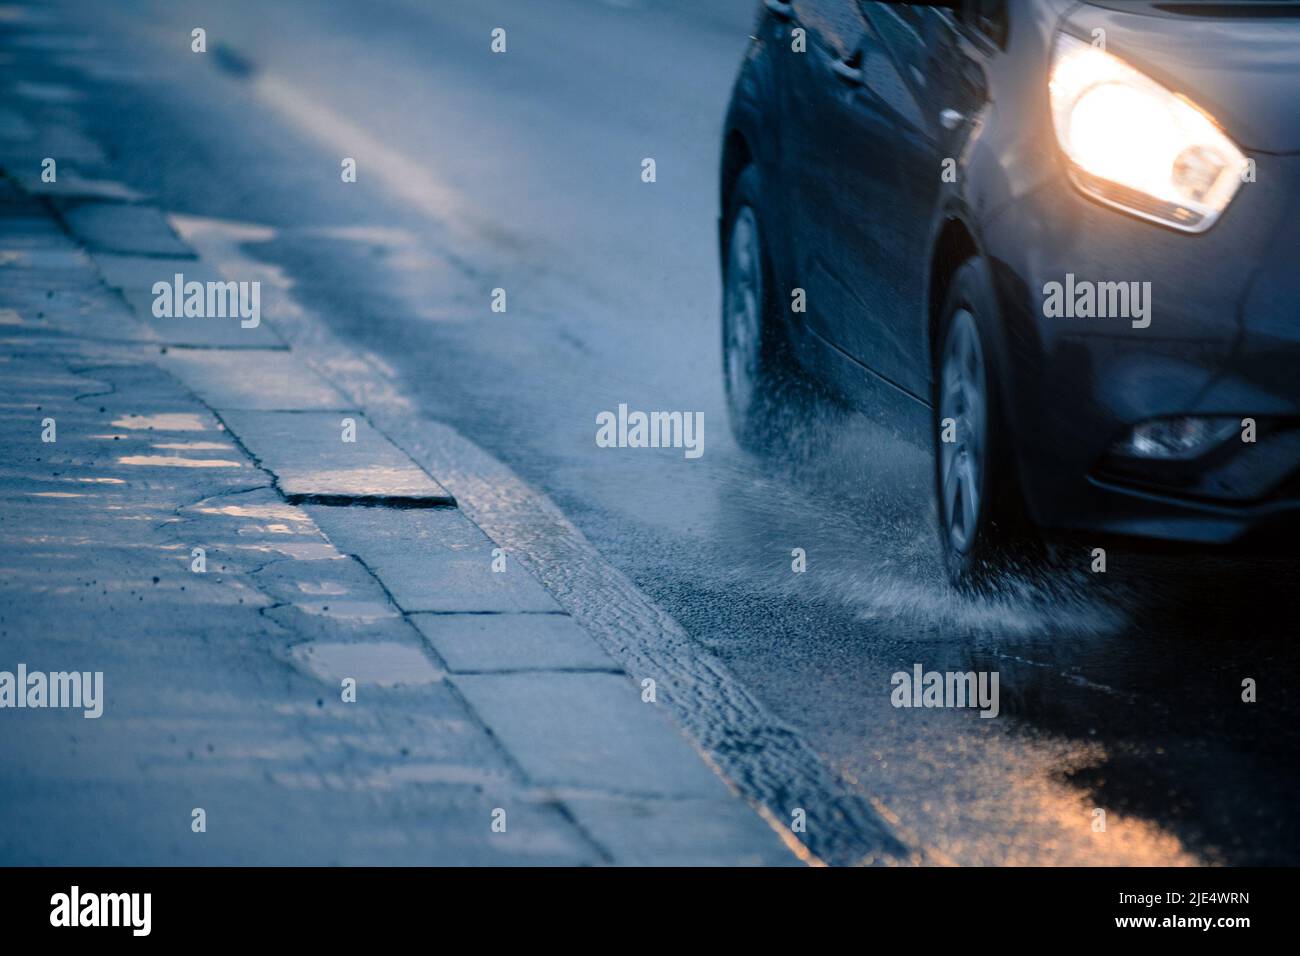 Fragment of car on wet road Stock Photo